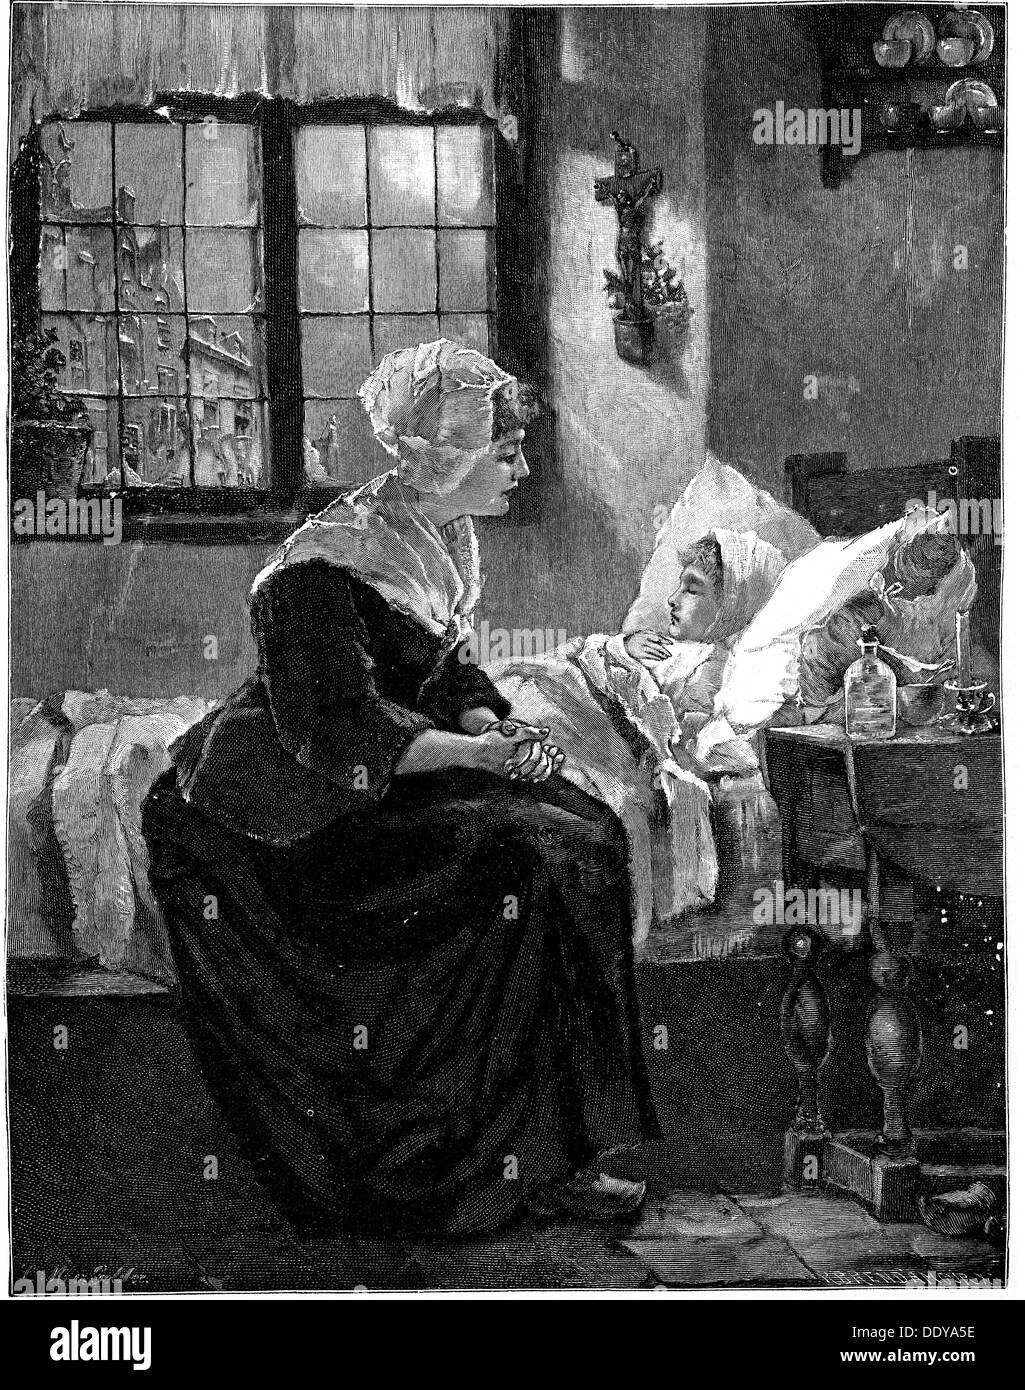 medicine,sick persons,mother at sick-bed of her daughter,after painting by Lucia Mathilde van Gelder(1865 - 1899),wood engraving by Richard Brend'amour,late 19th century,19th century,graphic,graphics,genre painting,genre works,genre scenes,family,families,mother,mothers,daughter,daughters,full length,sitting,sit,bed,beds,sick-bed,sickbed,sick-beds,sickbeds,sick person,sick people,sickness,sicknesses,ill,childhood disease,childhood illness,childhood diseases,childhood illnesses,concern,concerns,worry,worried,fear,for fea,Additional-Rights-Clearences-Not Available Stock Photo